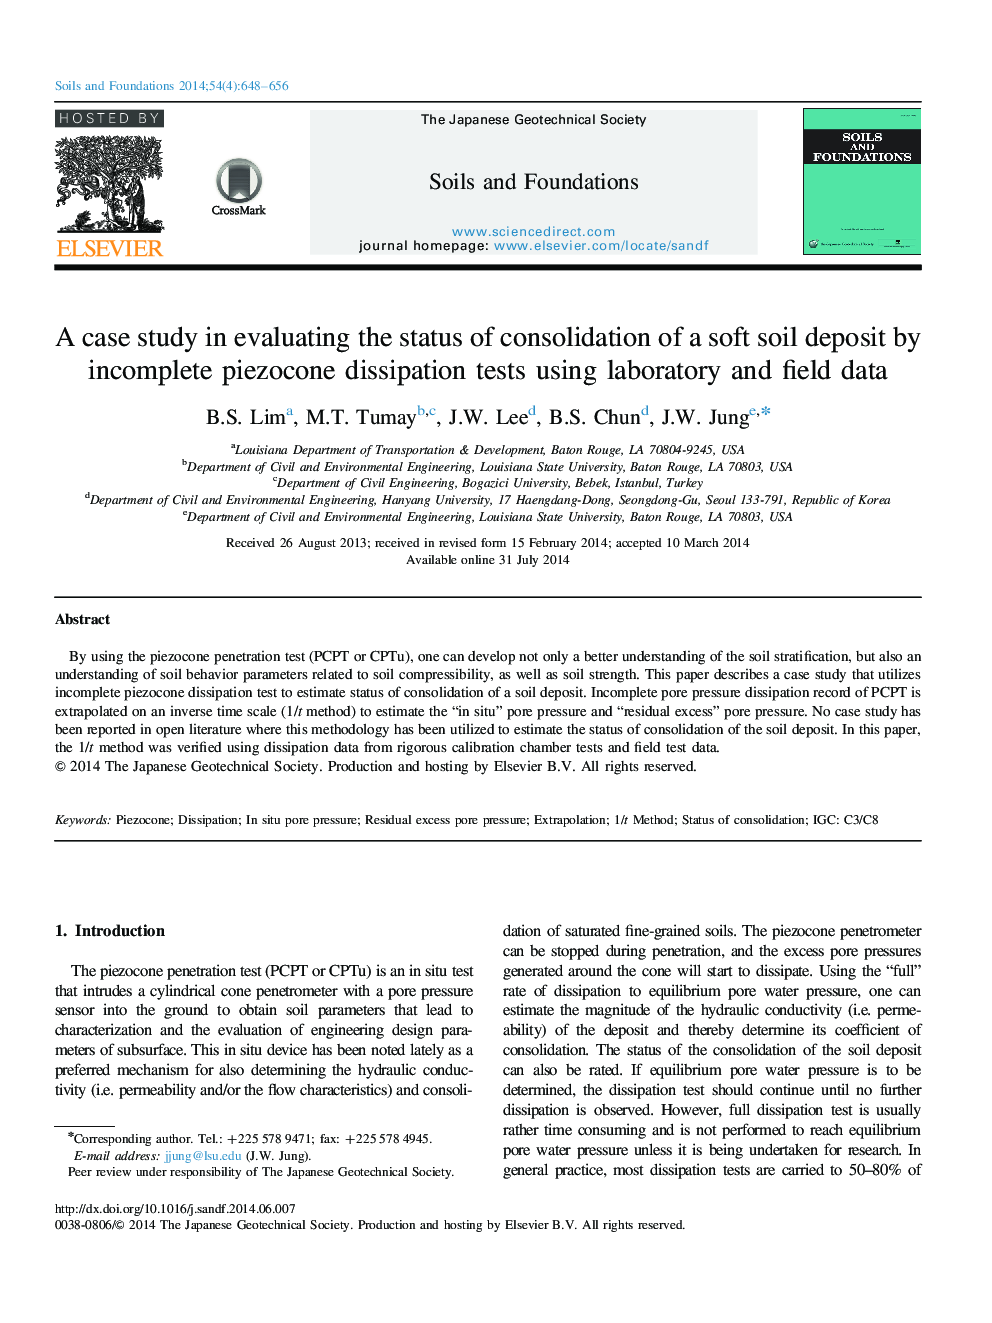 A case study in evaluating the status of consolidation of a soft soil deposit by incomplete piezocone dissipation tests using laboratory and field data 